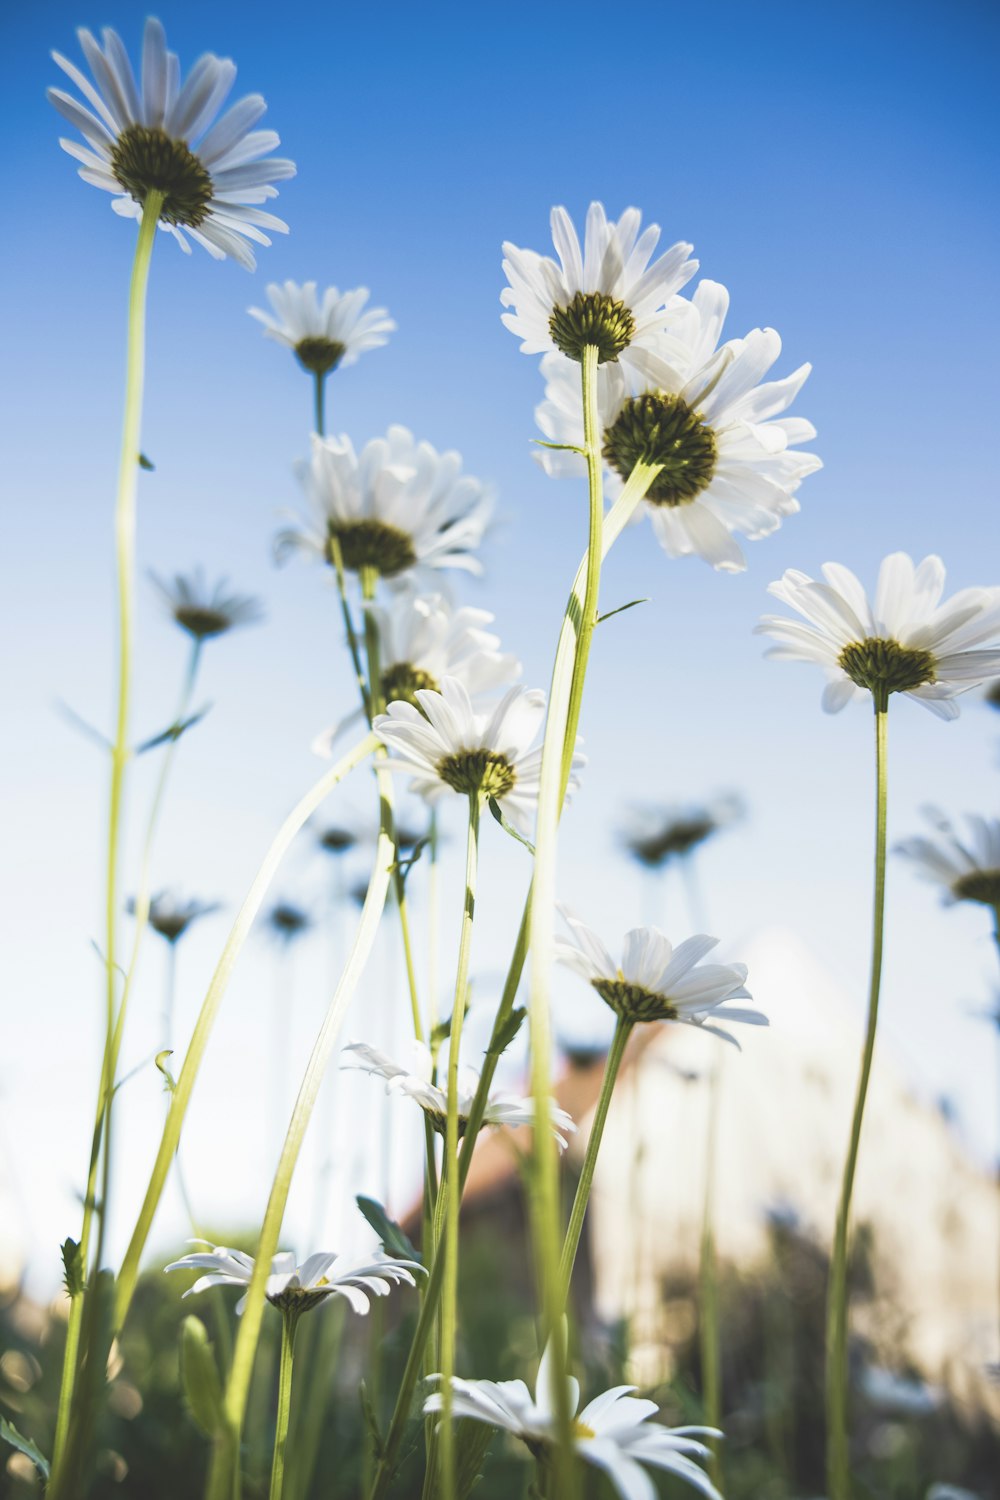 a bunch of daisies in a field with a blue sky in the background